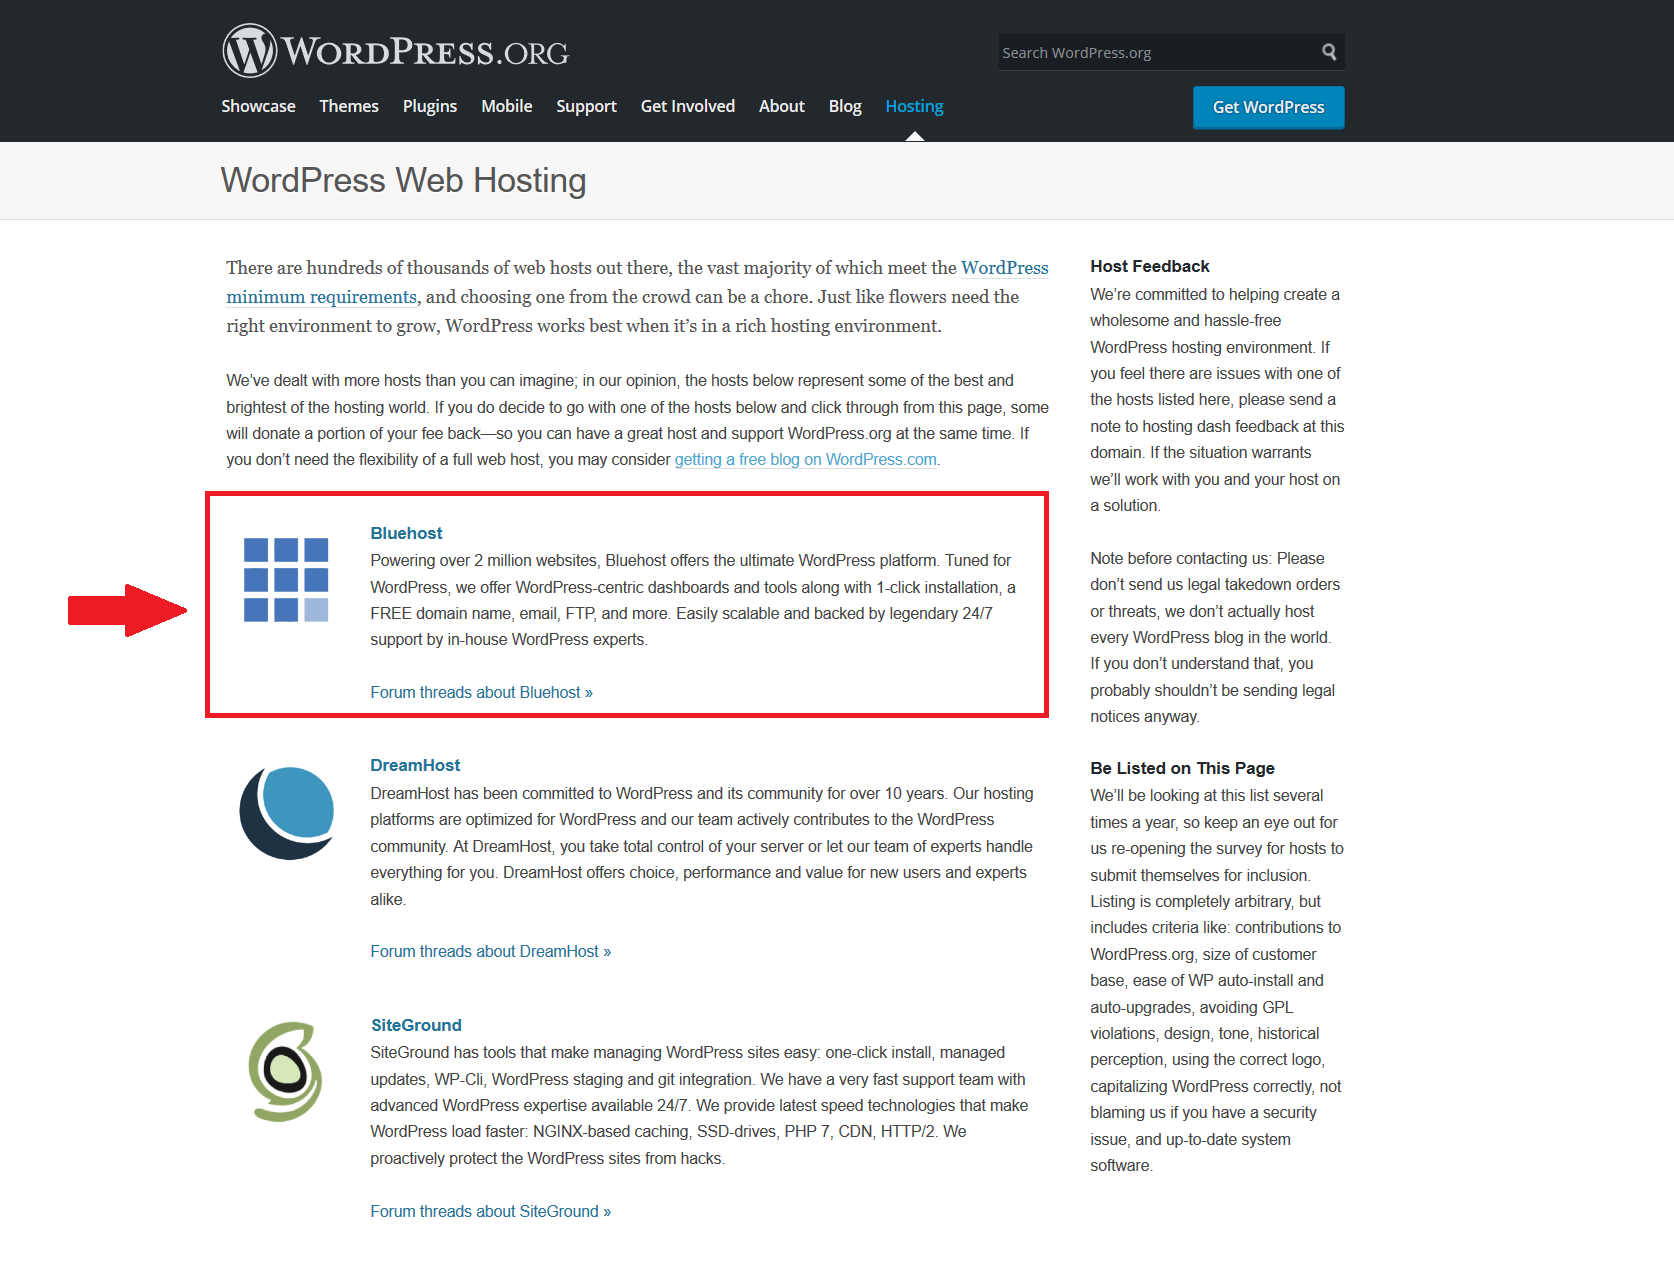 Bluehost web hosting is officially recommended by WordPress